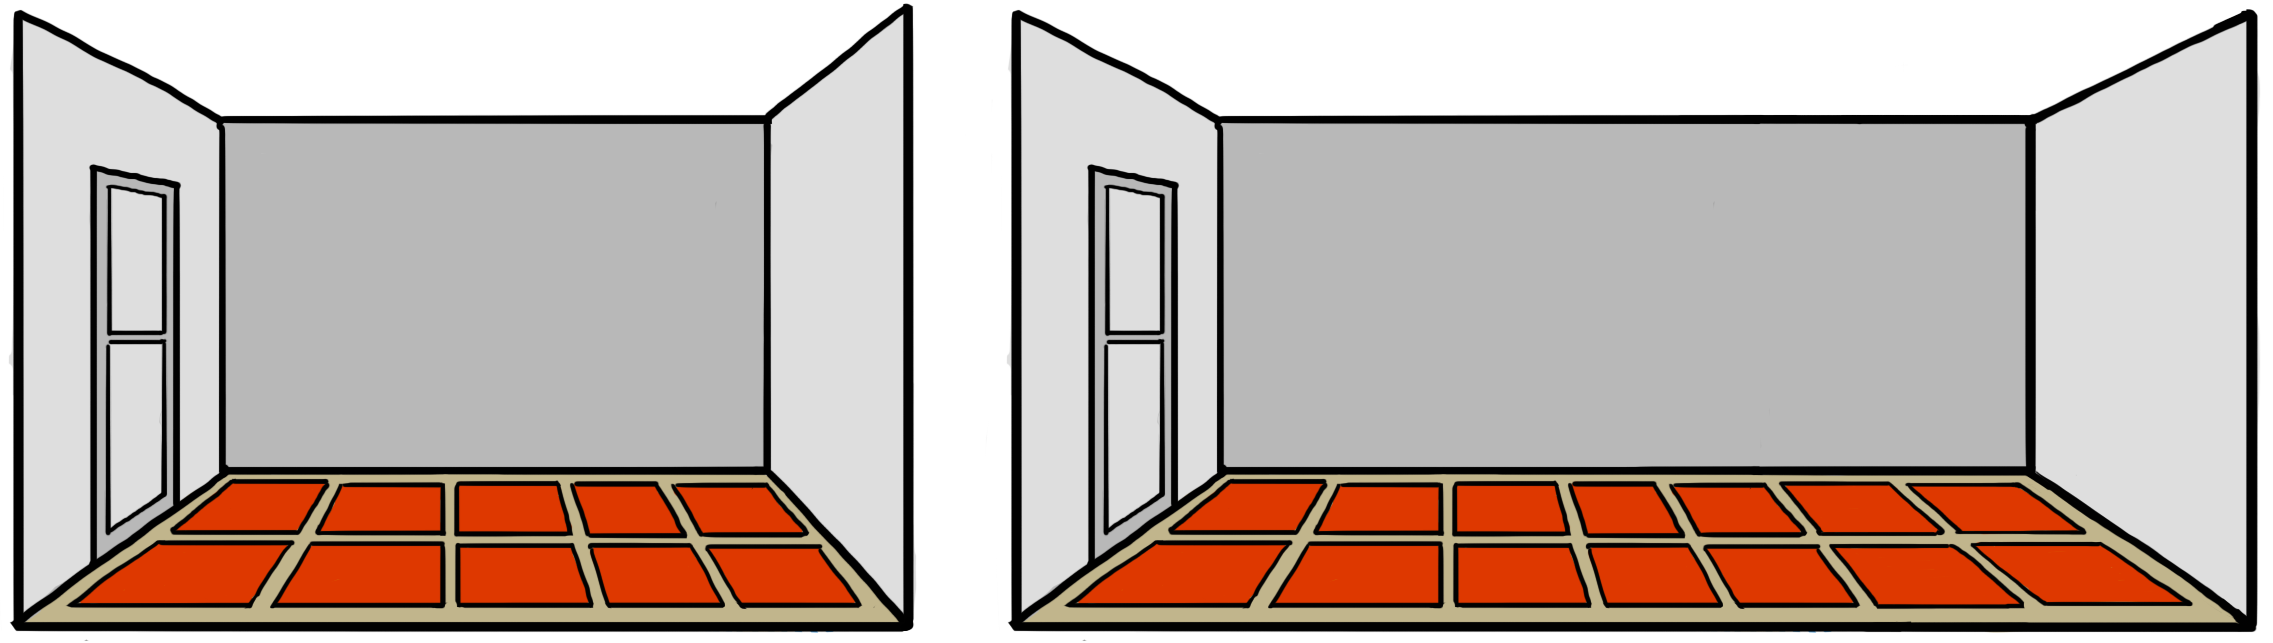 Two rooms measured with square meters